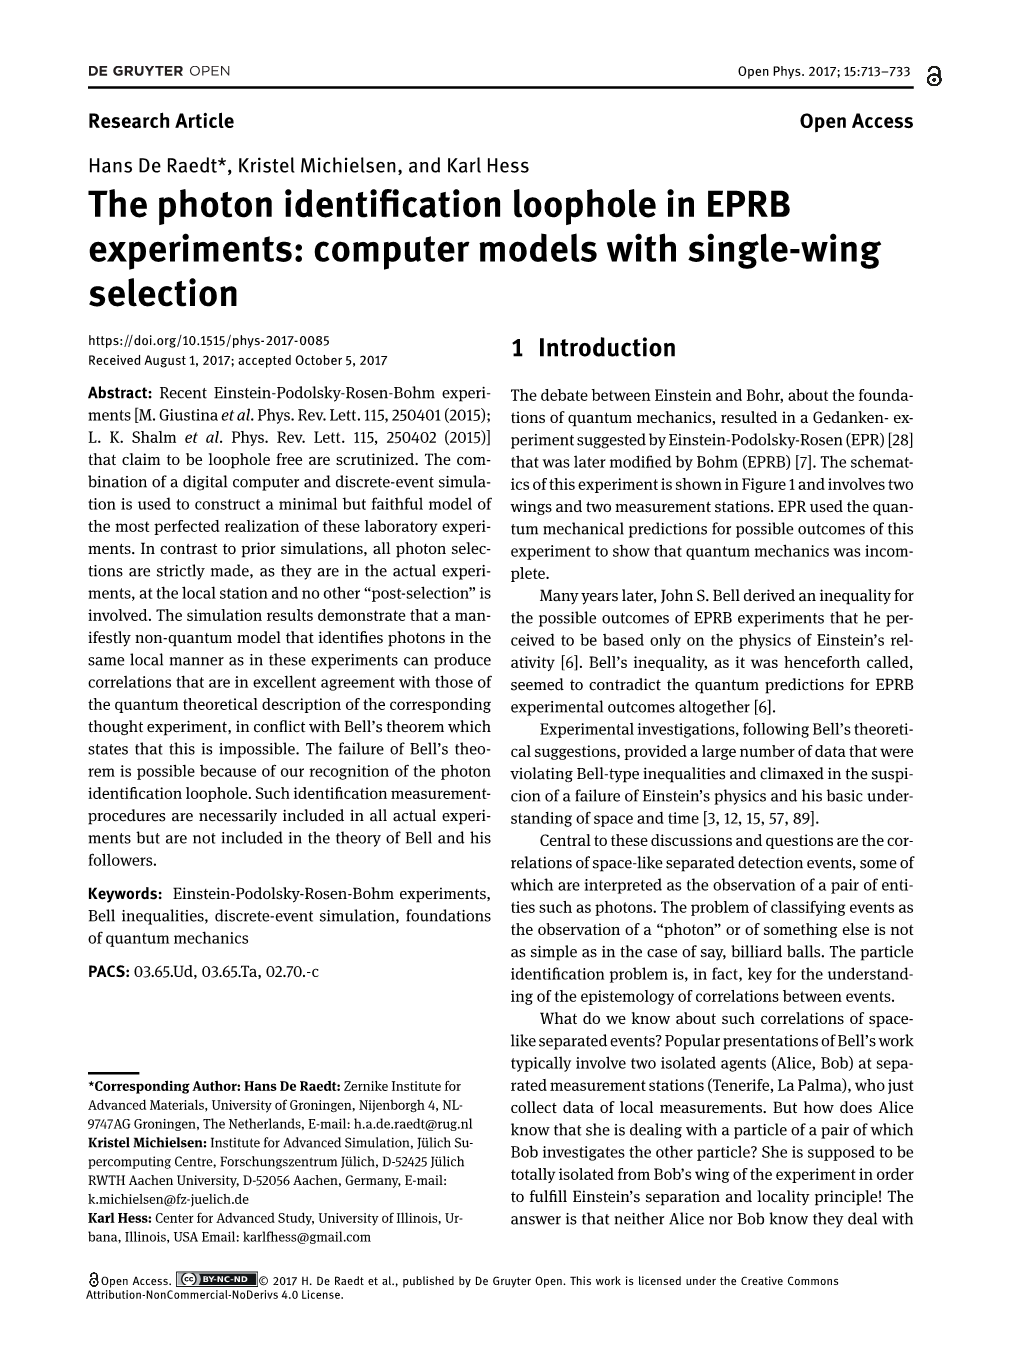 The Photon Identi Cation Loophole in EPRB Experiments